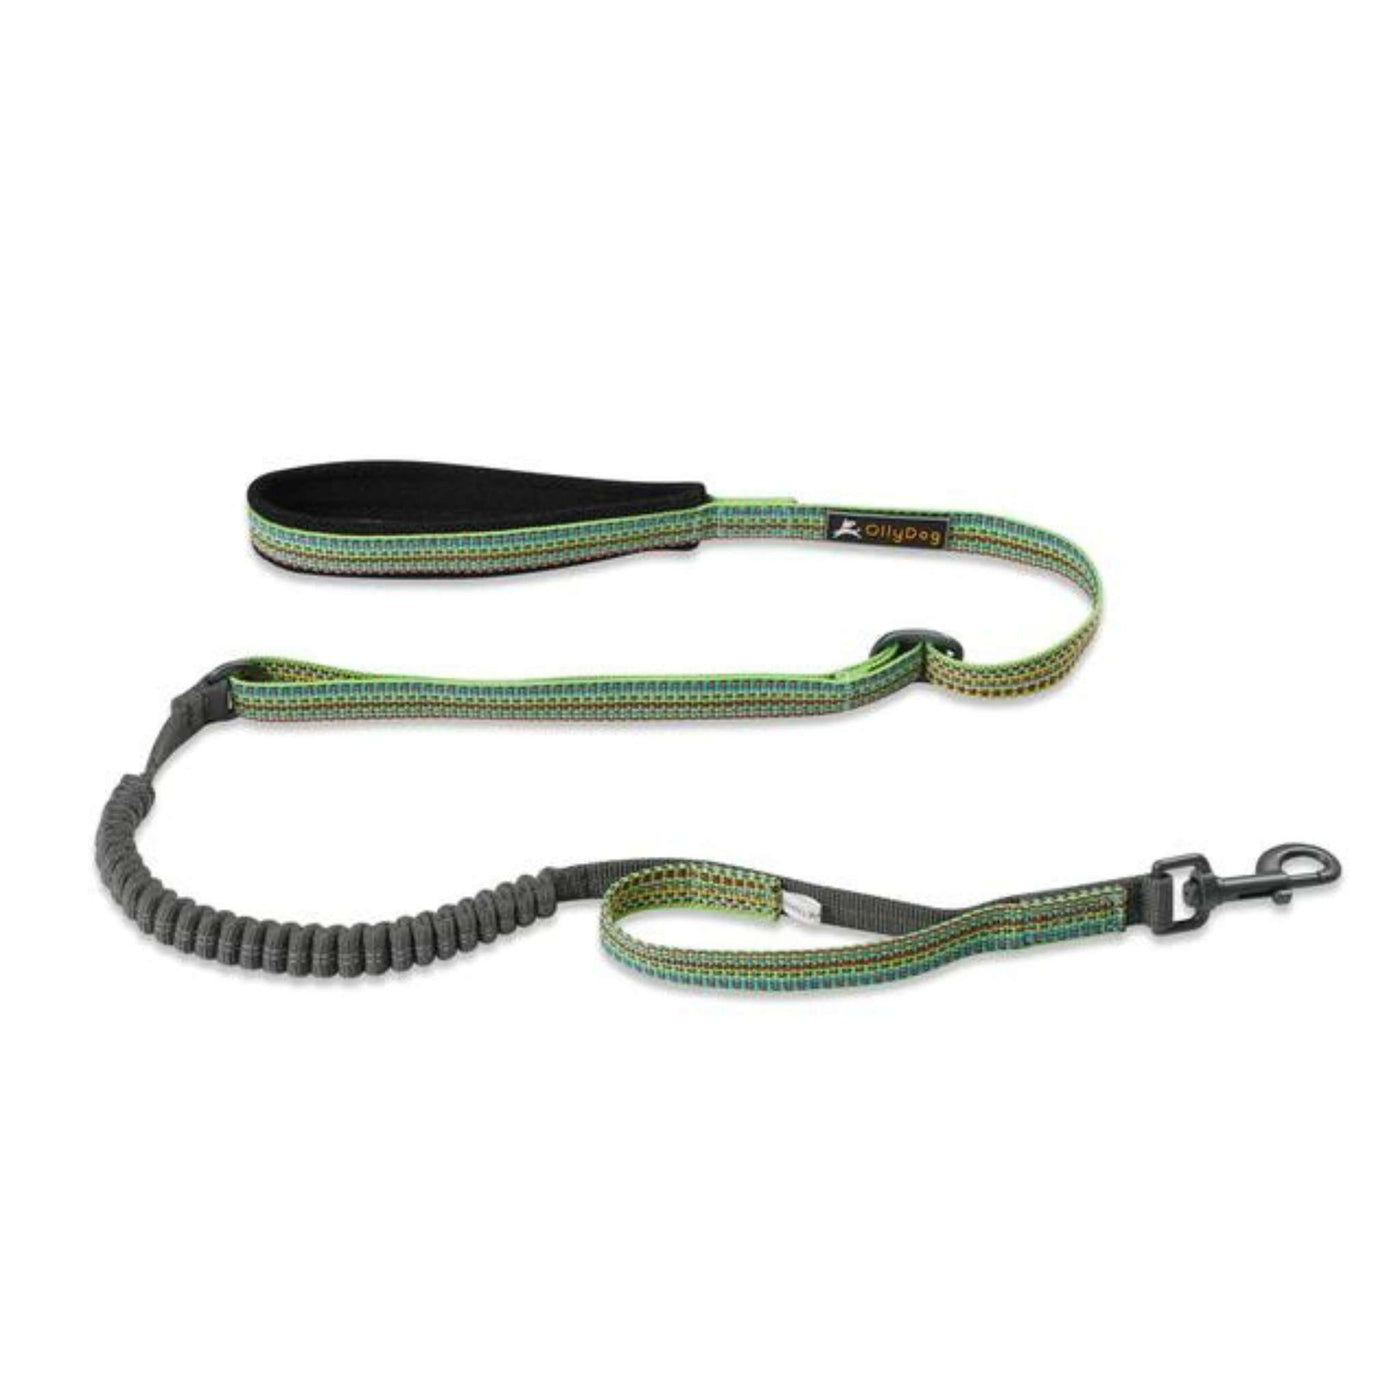 OllyDog Rescue Adjustable Spring Leash | Outdoor Dog Gear & Harnesses | Further Faster Christchurch NZ #prism-green